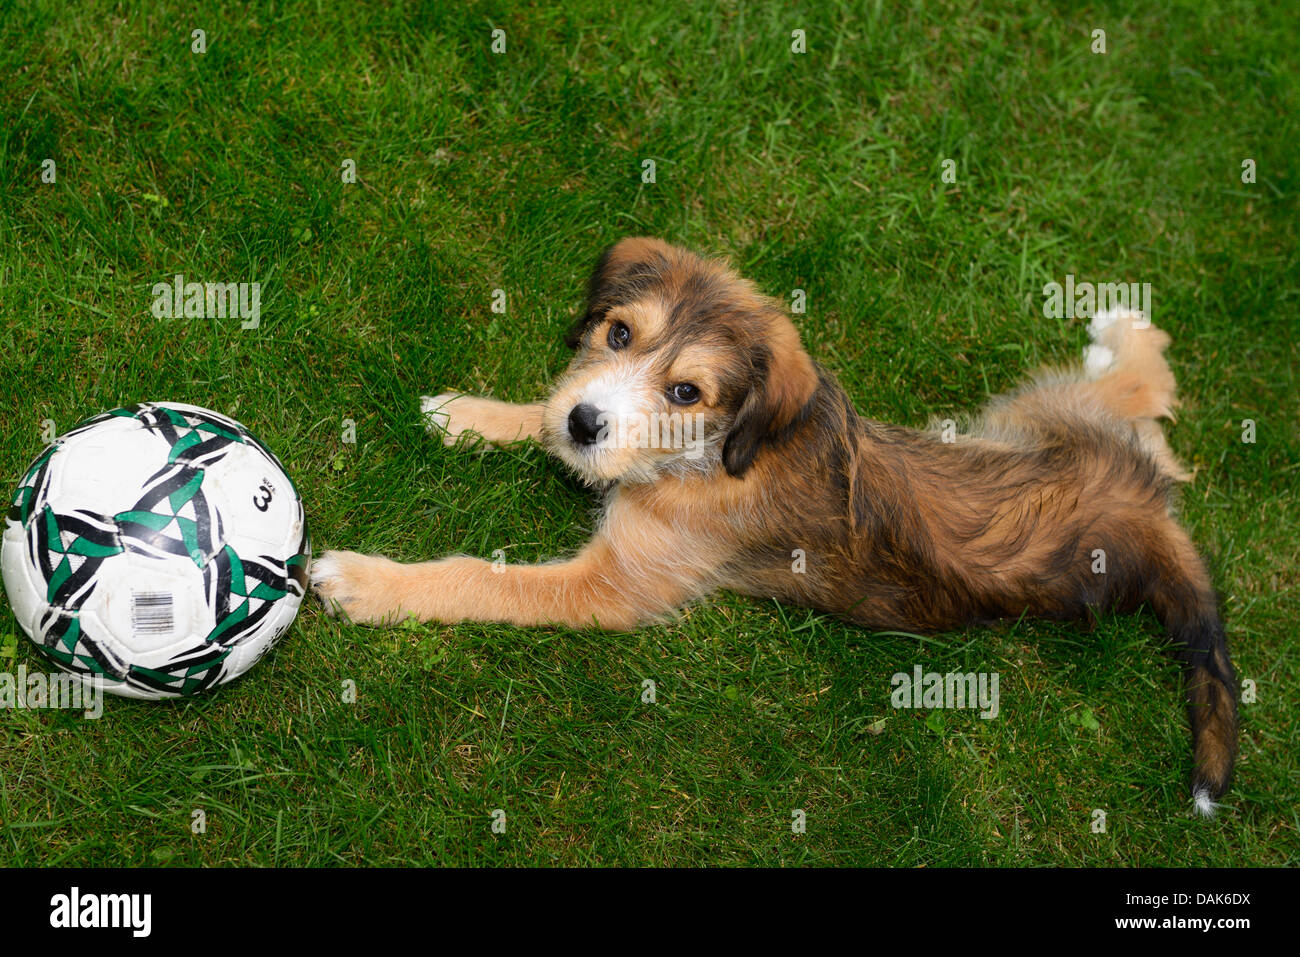 Mixed breed puppy lying on grass looking up with soccer ball Stock Photo